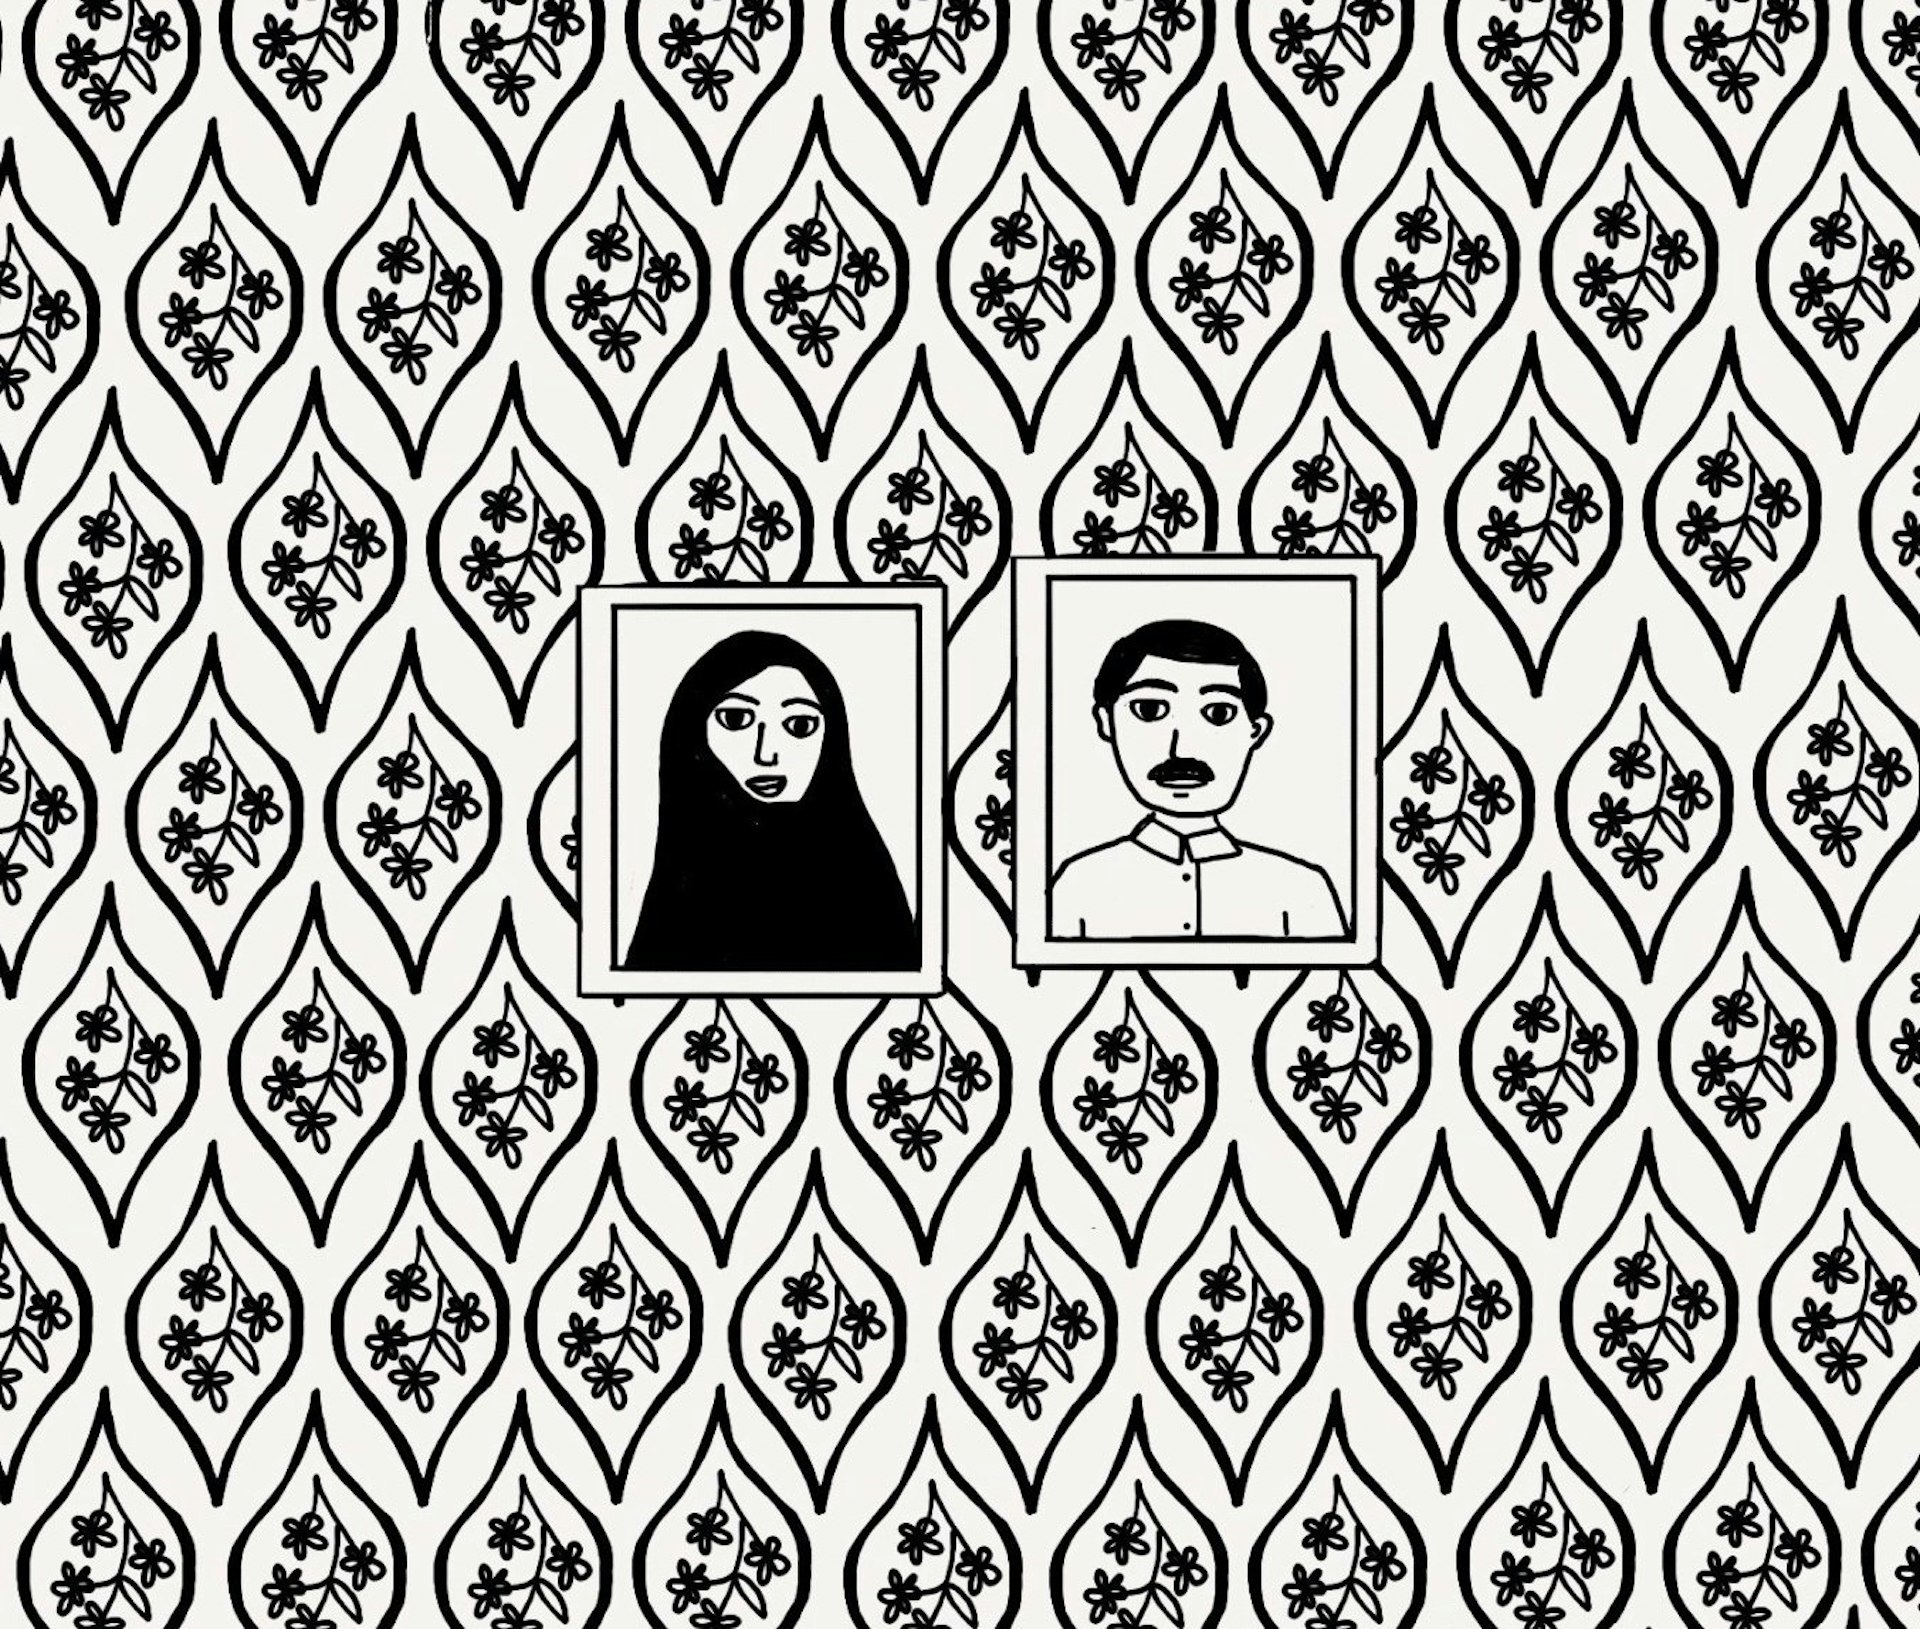 Illustrations that capture the changing face of Iran